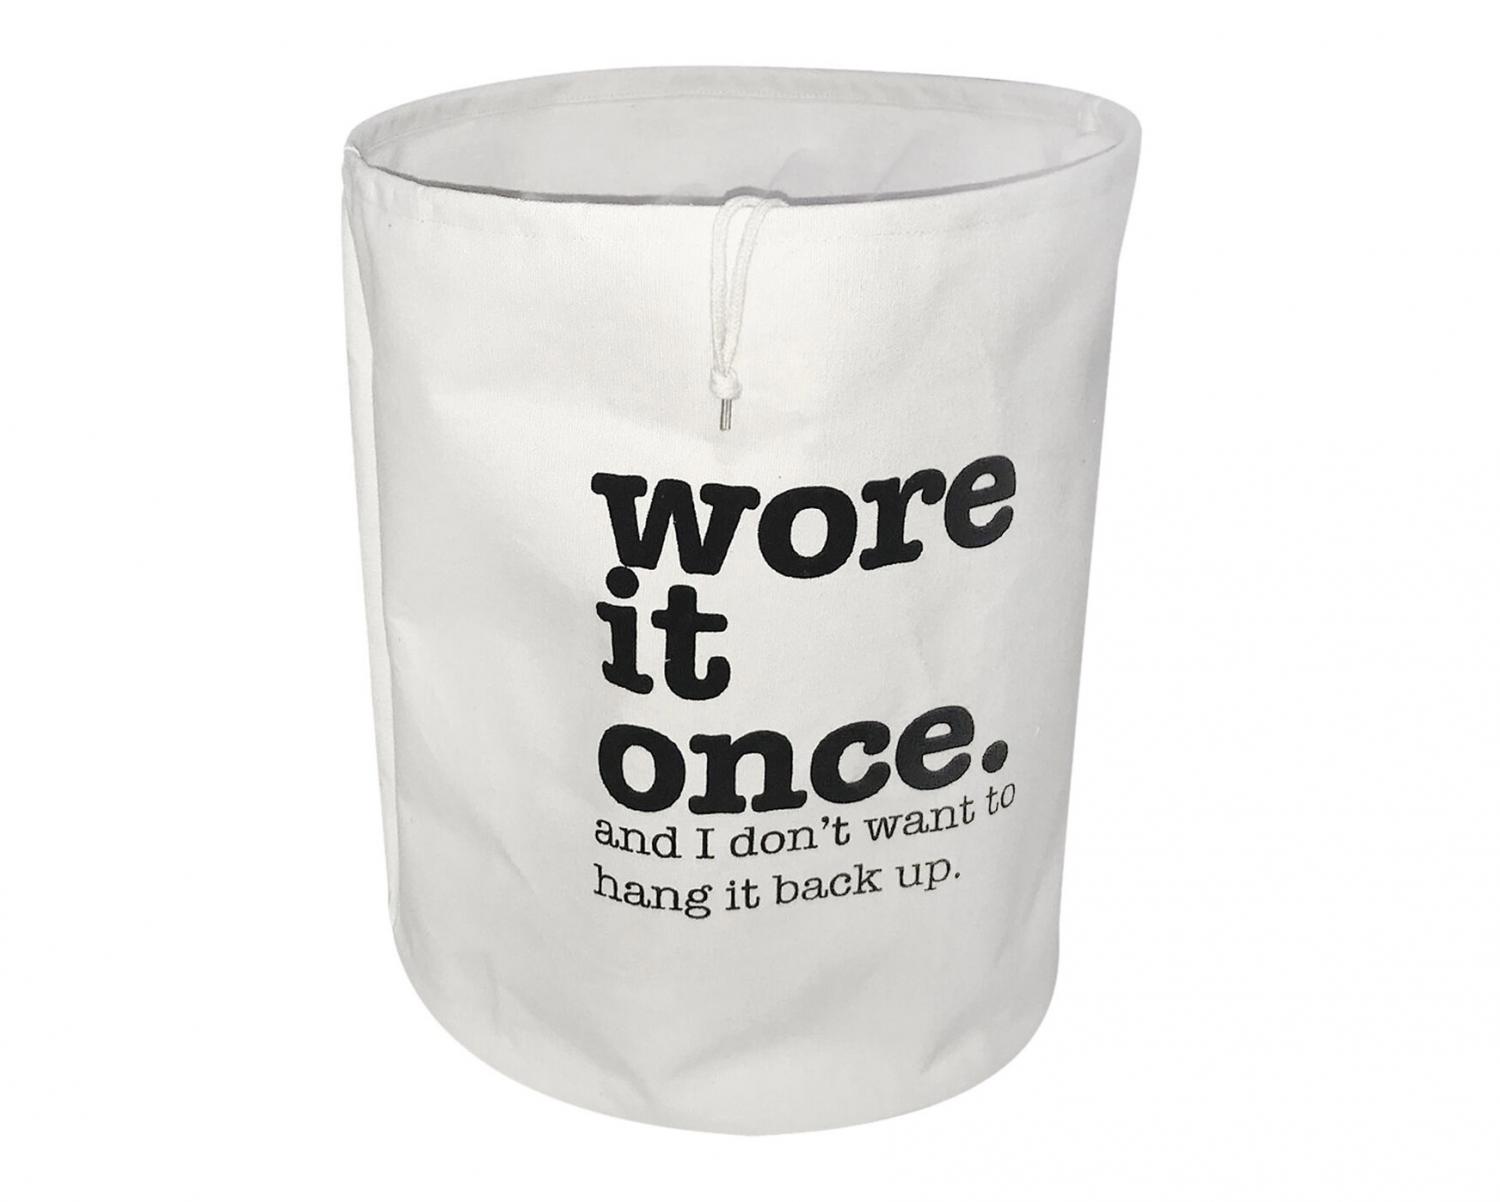 There's Now a 'Wore It Once' Laundry Bag That Can Replace That Chair In The  Corner Of Your Bedroom